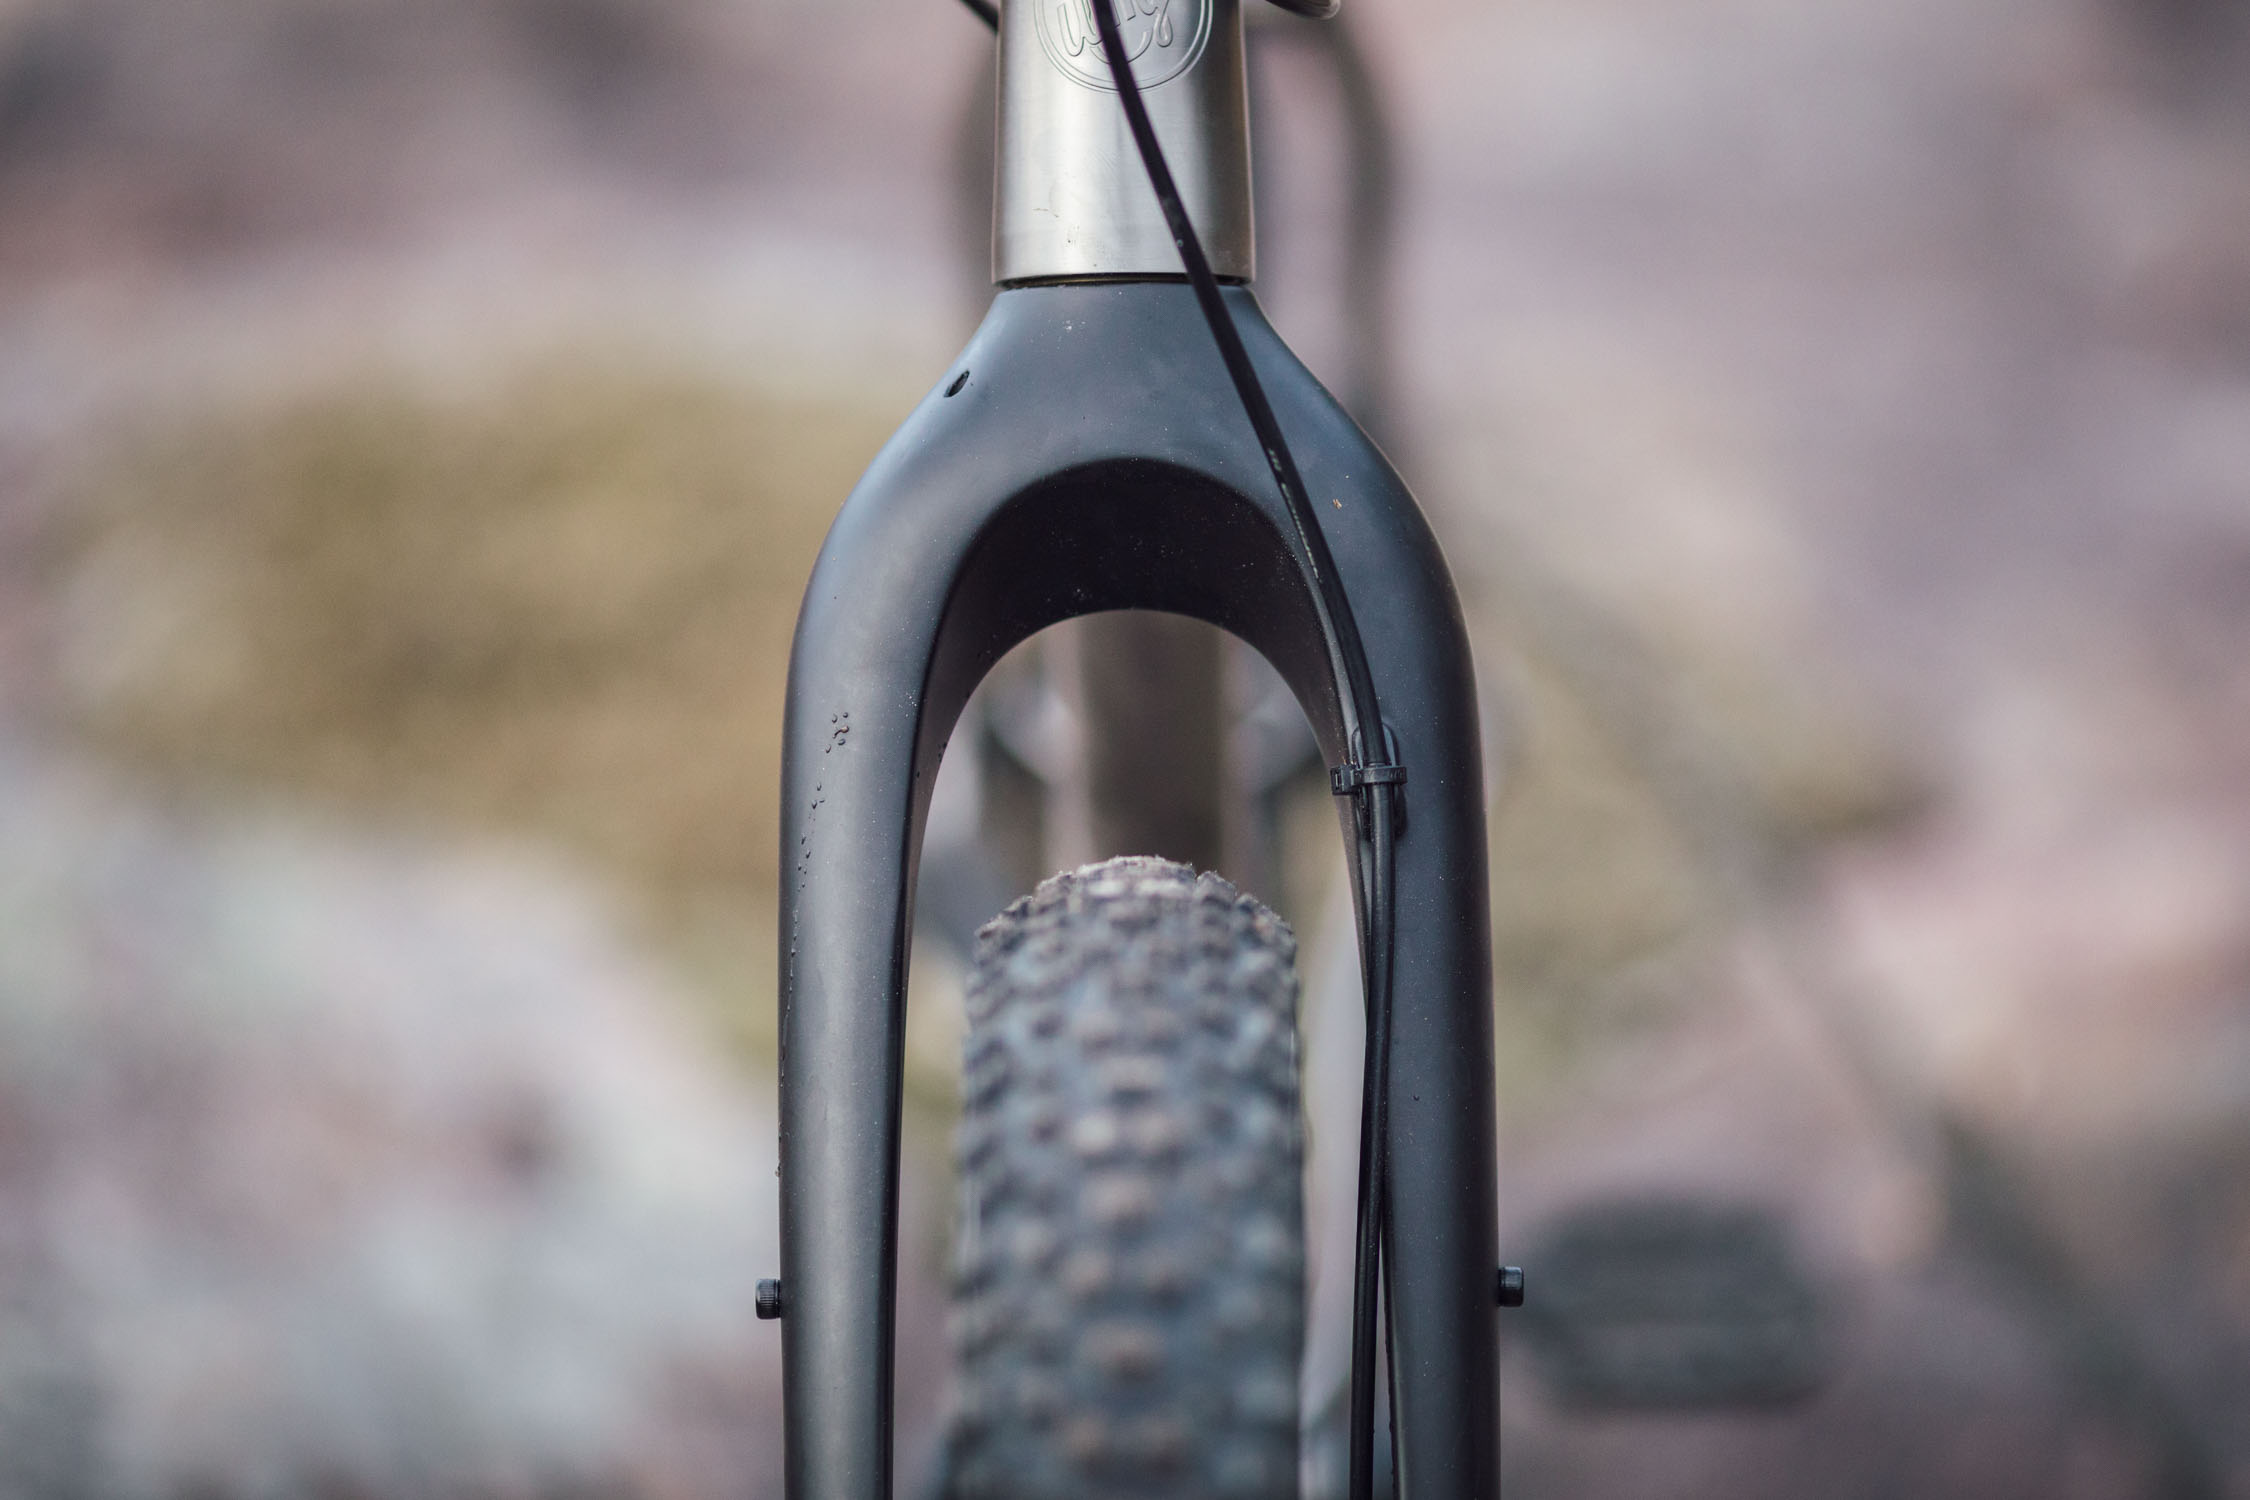 New Whisky Carbon Boost Fork Review (Whisky No.9 MTN LT 